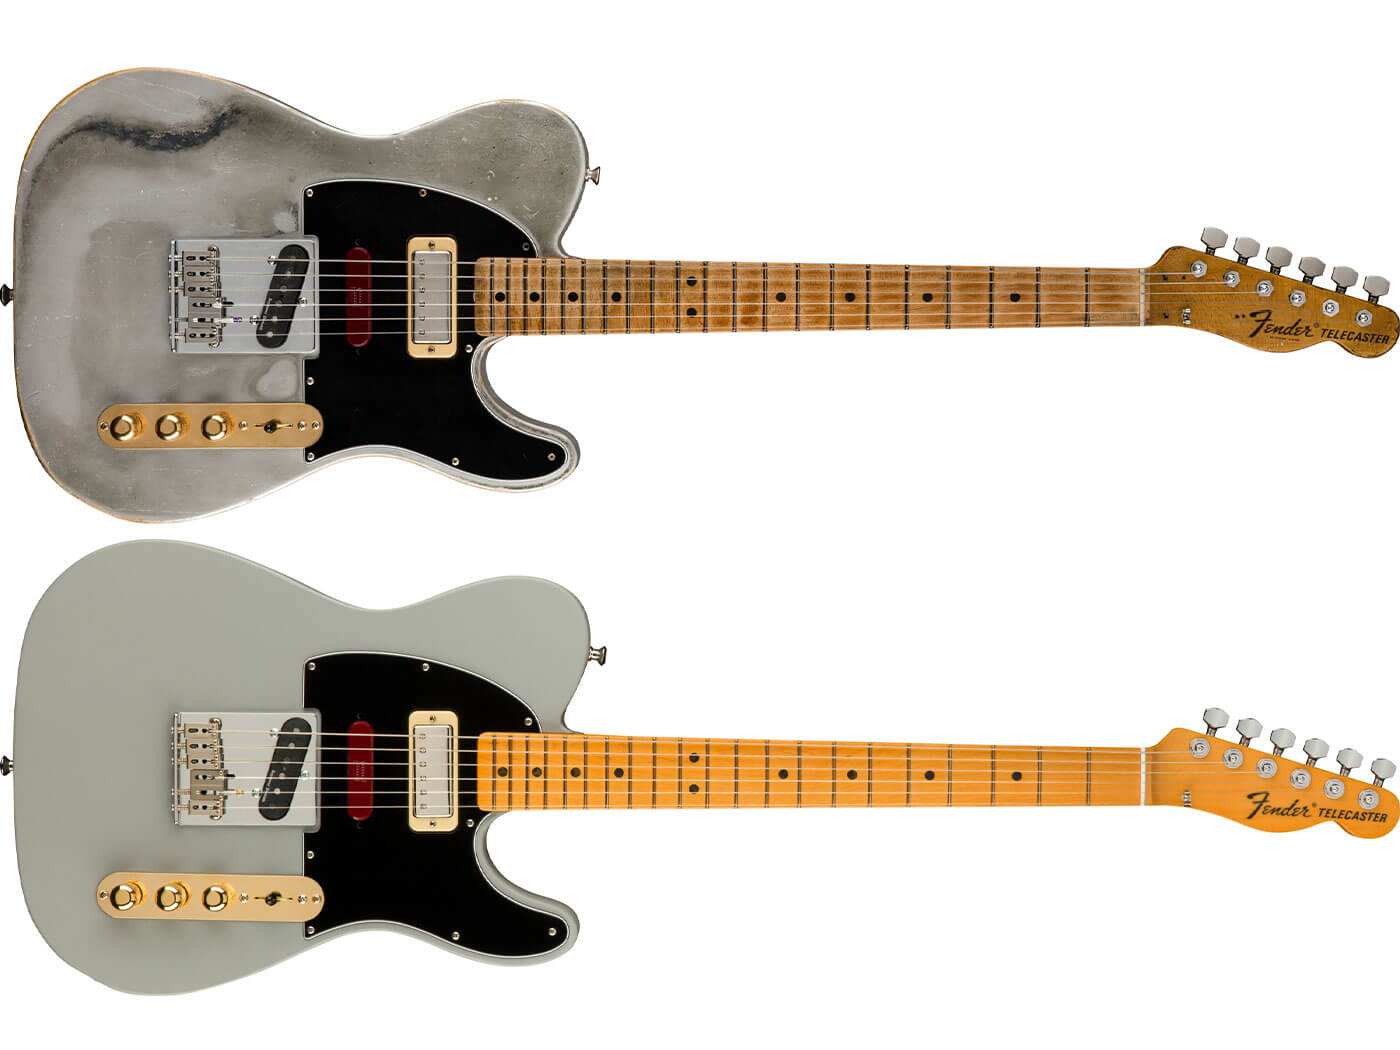 The Custom Shop (top) and production line Brent Mason Telecaster models.